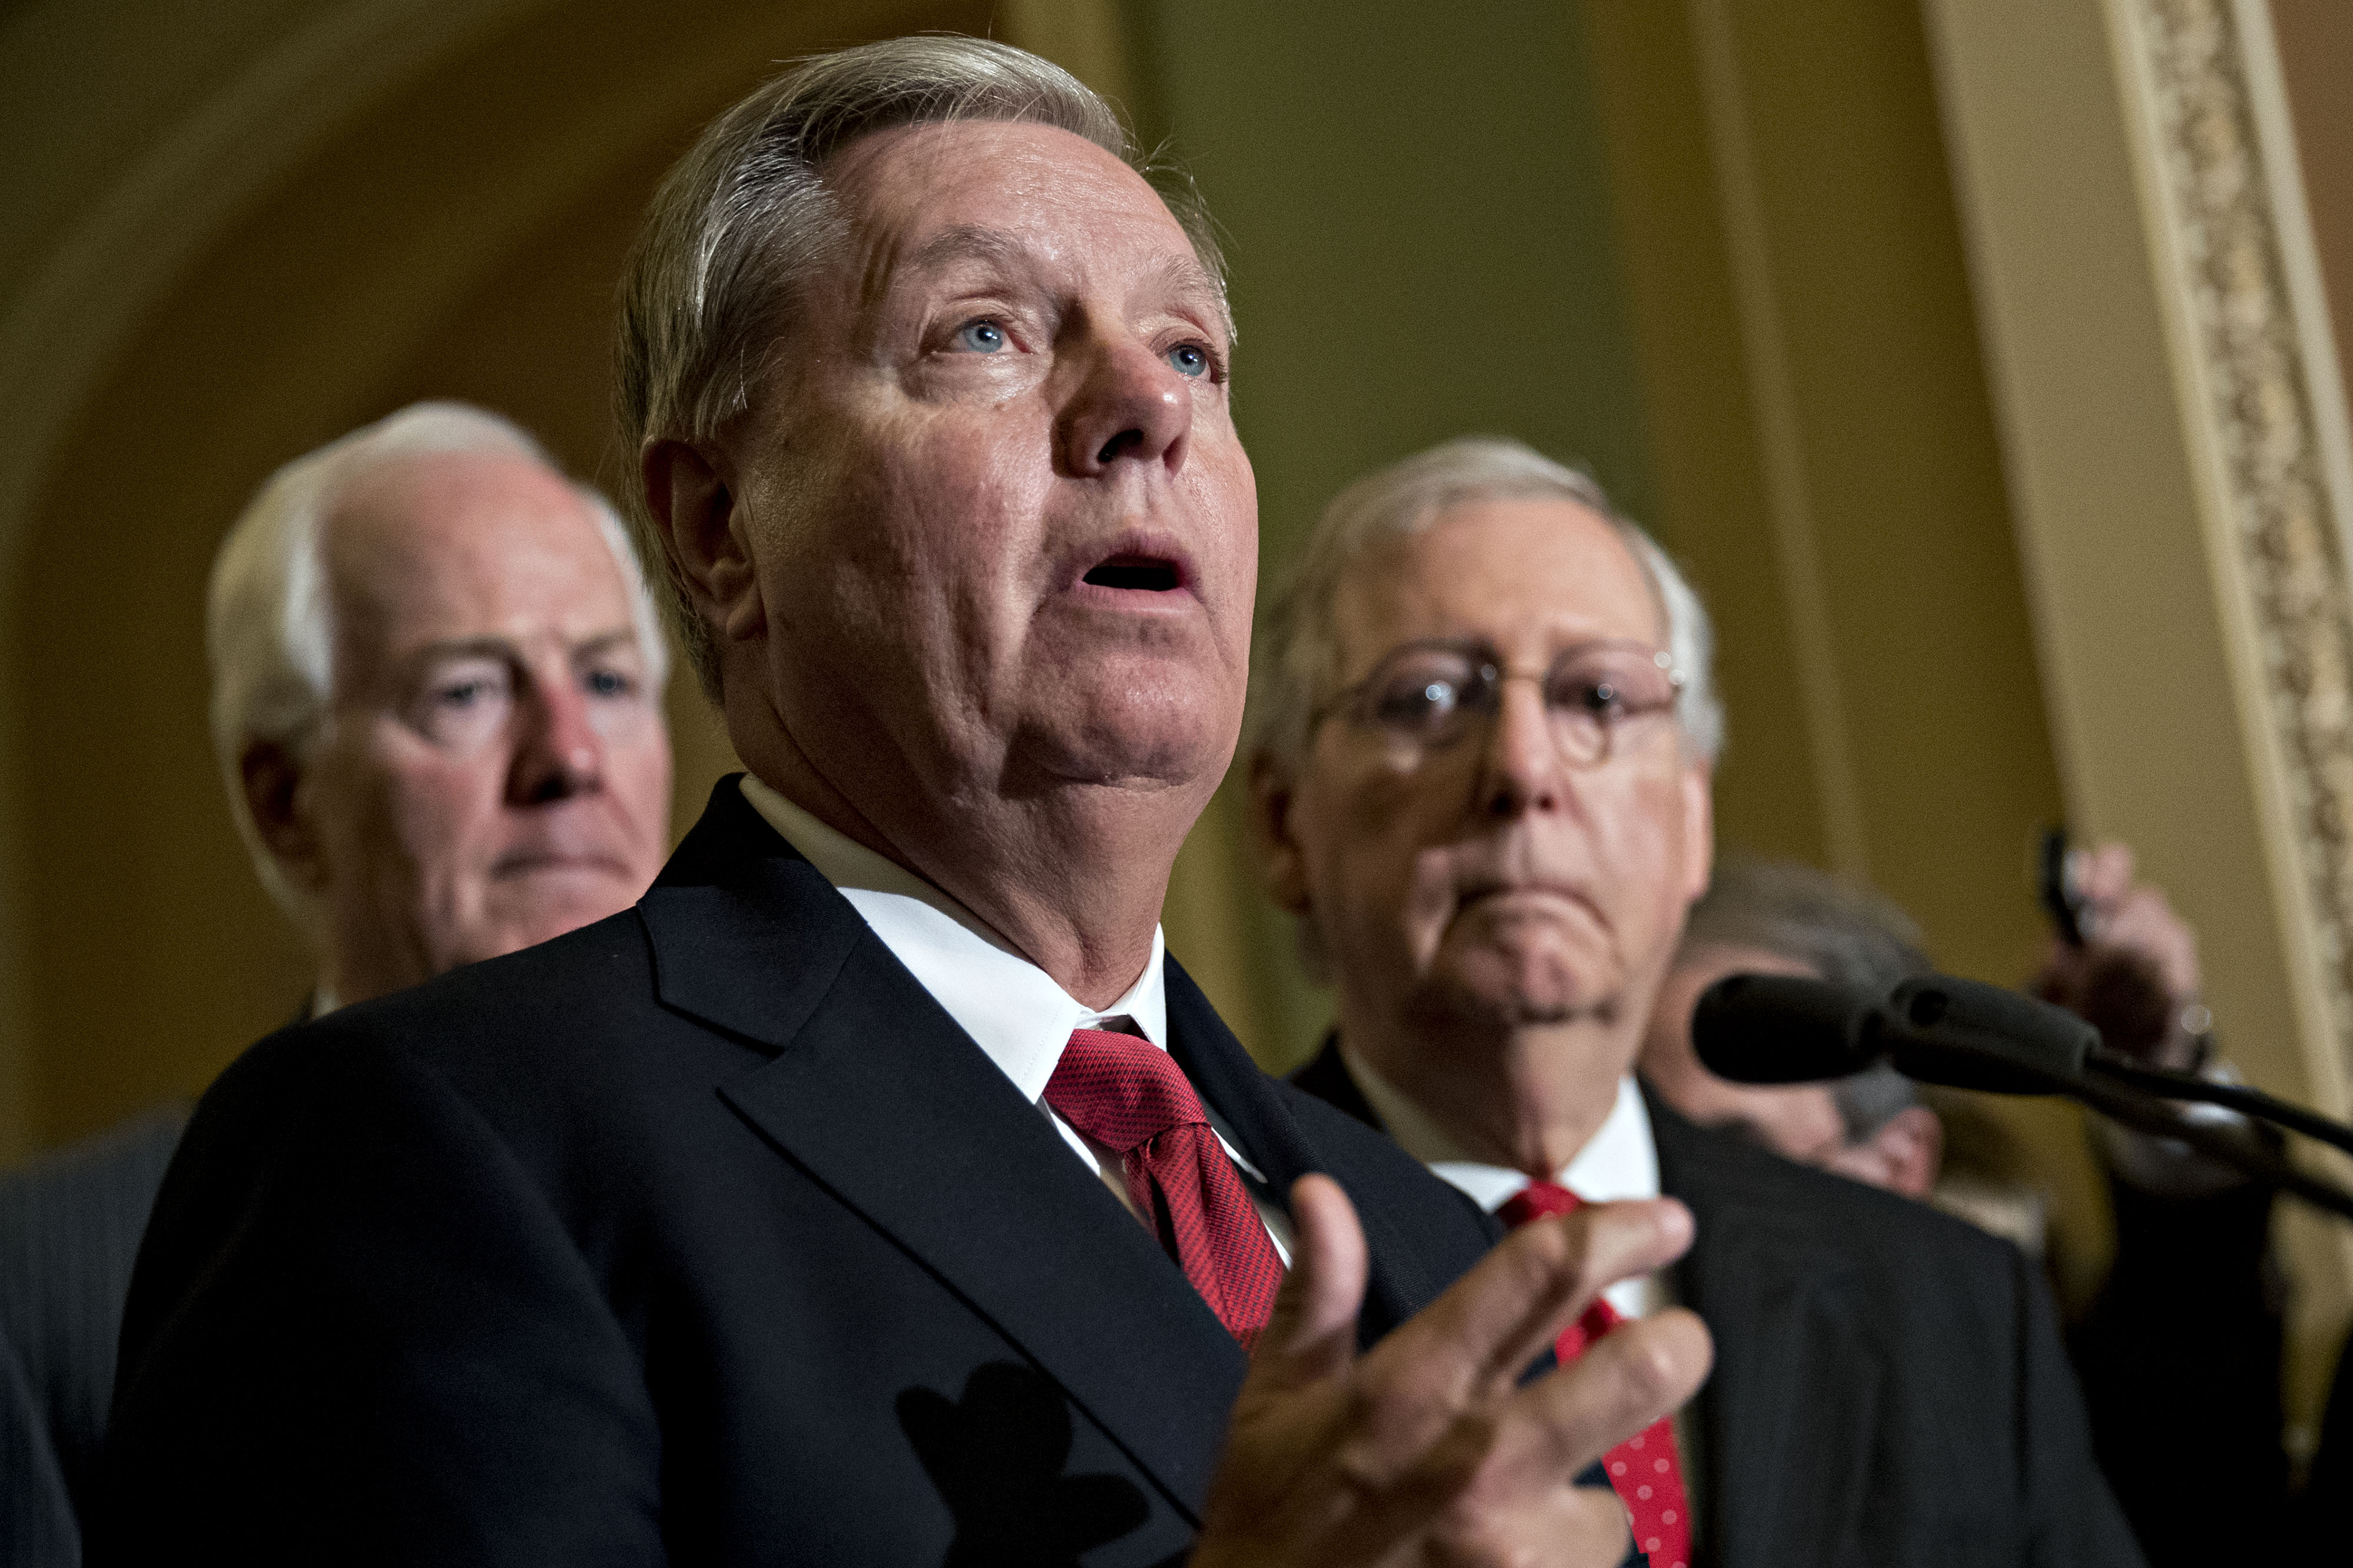 Senator Lindsey Graham, a Republican from South Carolina, speaks as Senate Majority Leader Mitch McConnell, a Republican from Kentucky, right, listens during a news conference after a Republican policy meeting luncheon at the U.S. Capitol. (Bloomberg&mdash;Bloomberg via Getty Images)